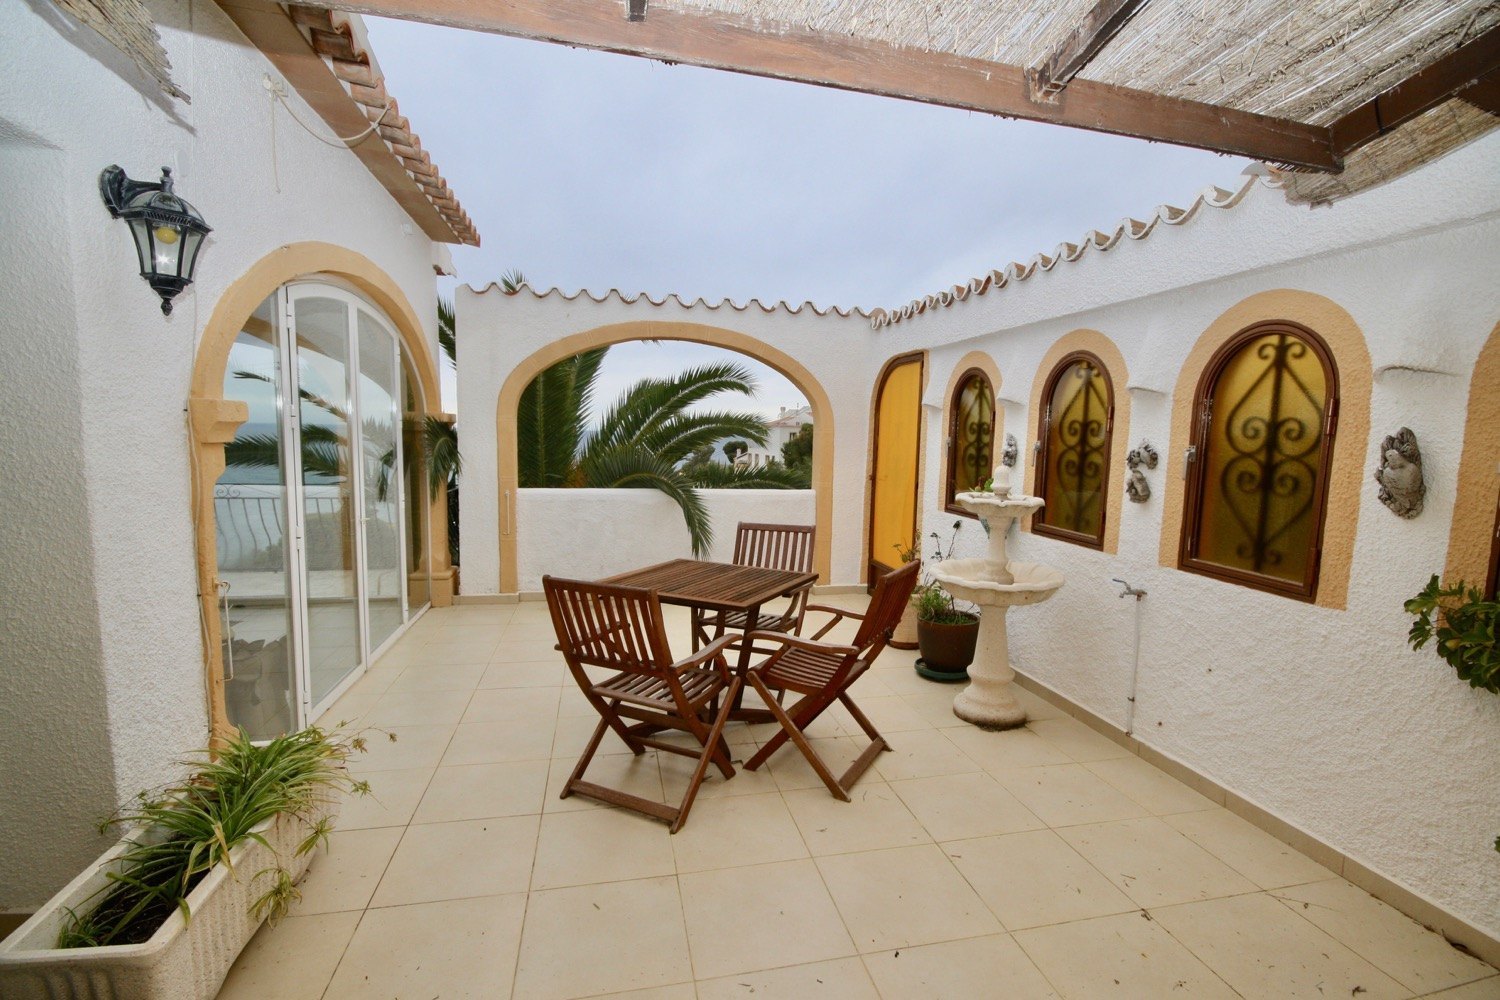 For sale villa with plenty of room and Seaview in Javea